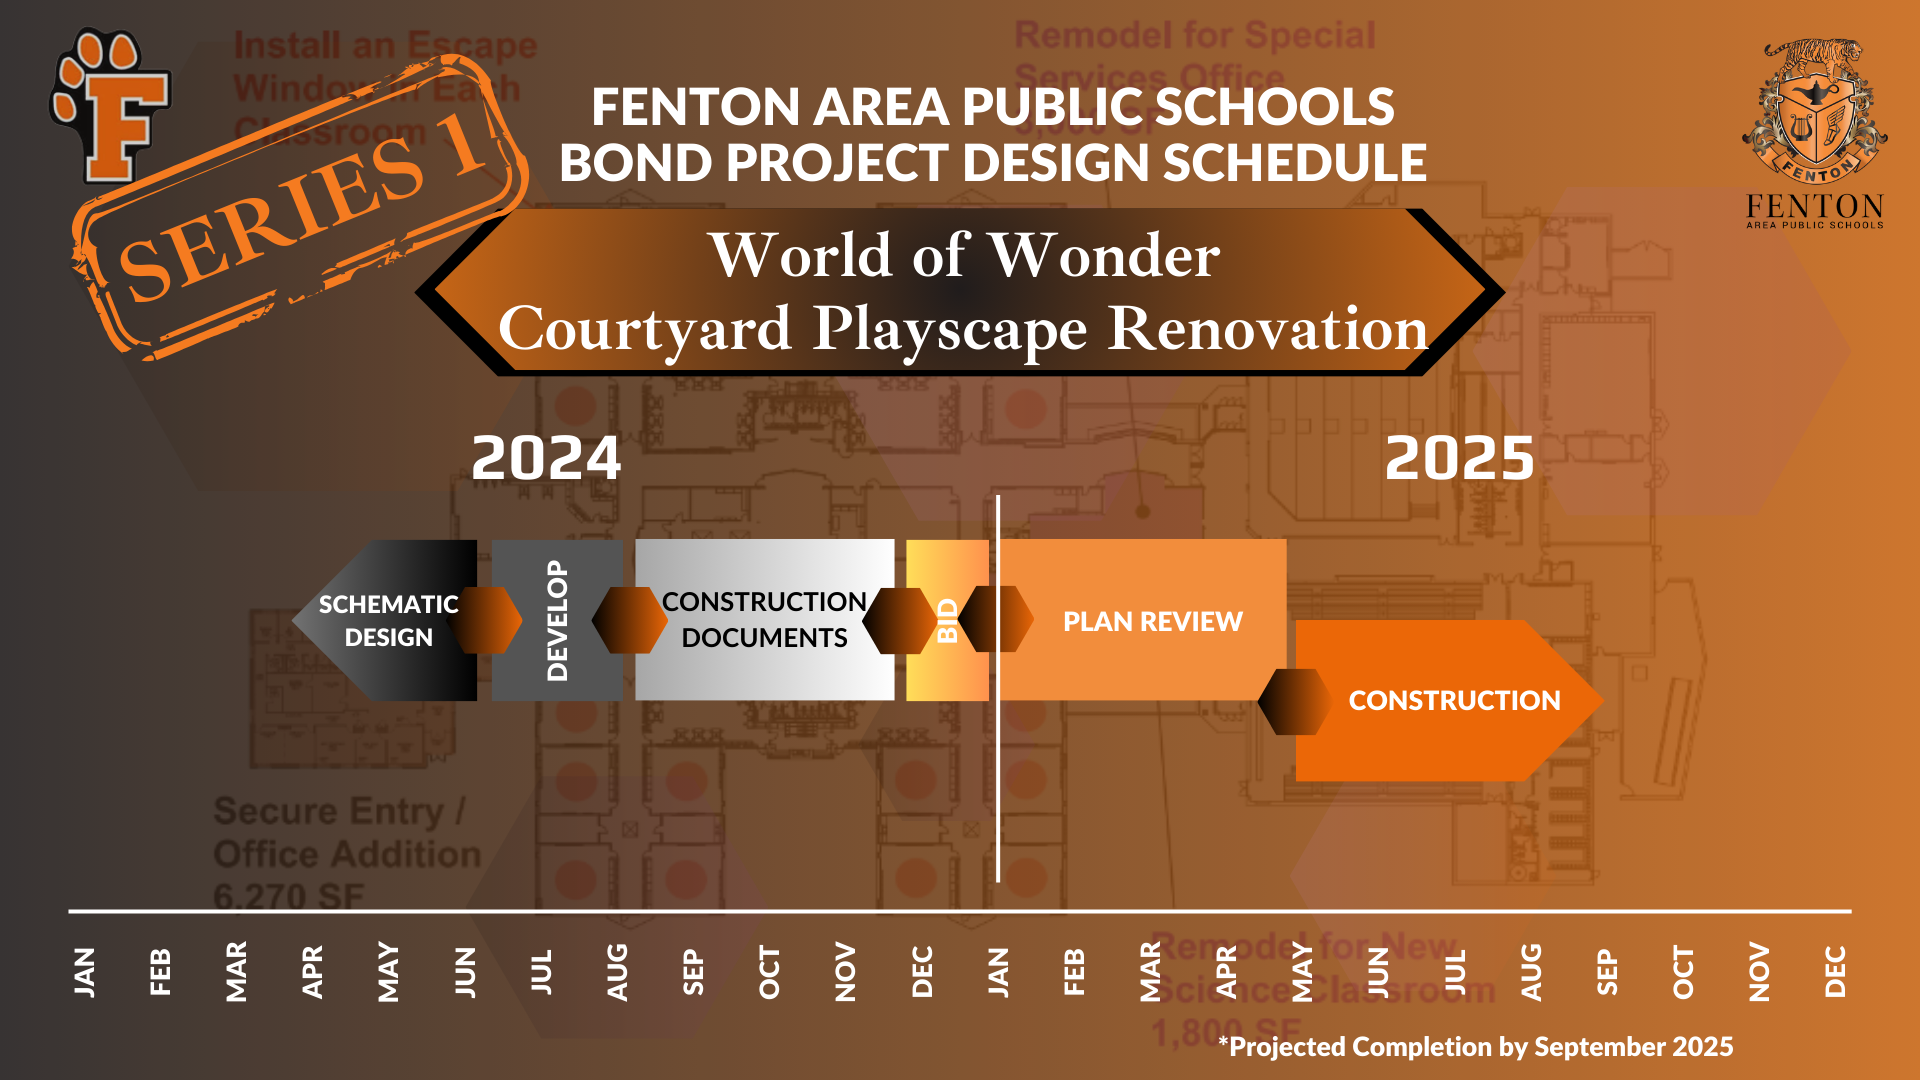 WoW Courtyard Playscape Renovation Timeline